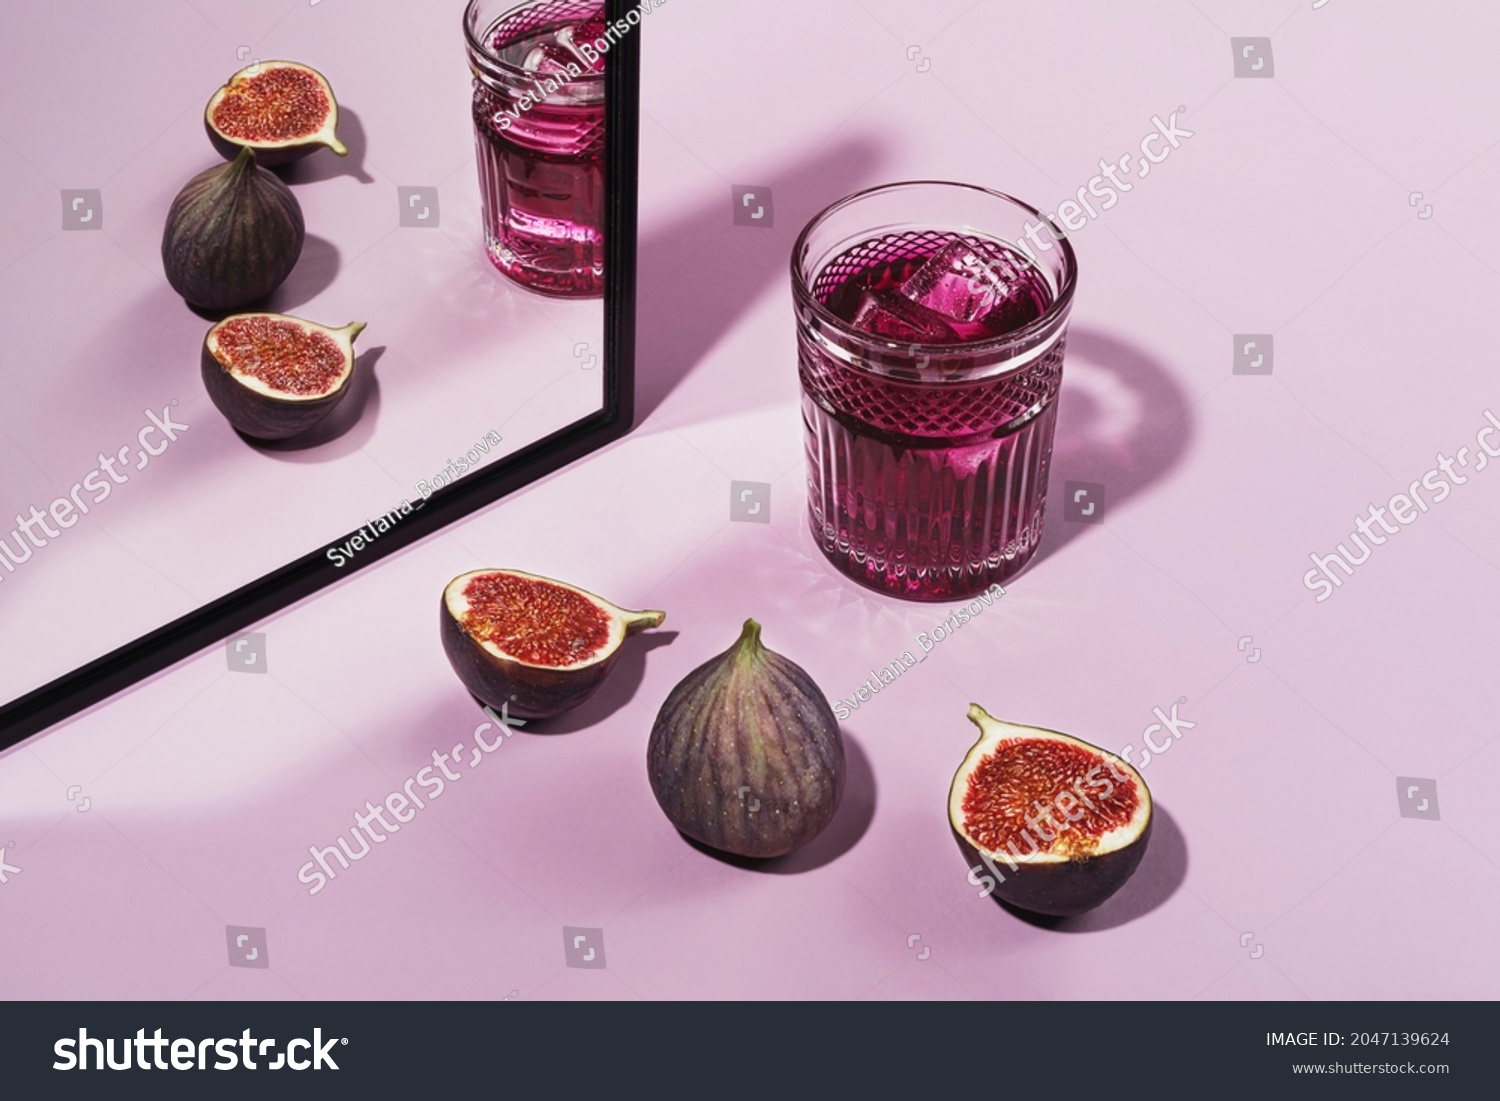 Colorful cocktail garnished with figs. Cocktail purple color garnished with figs, frontal view. On a pink background #2047139624